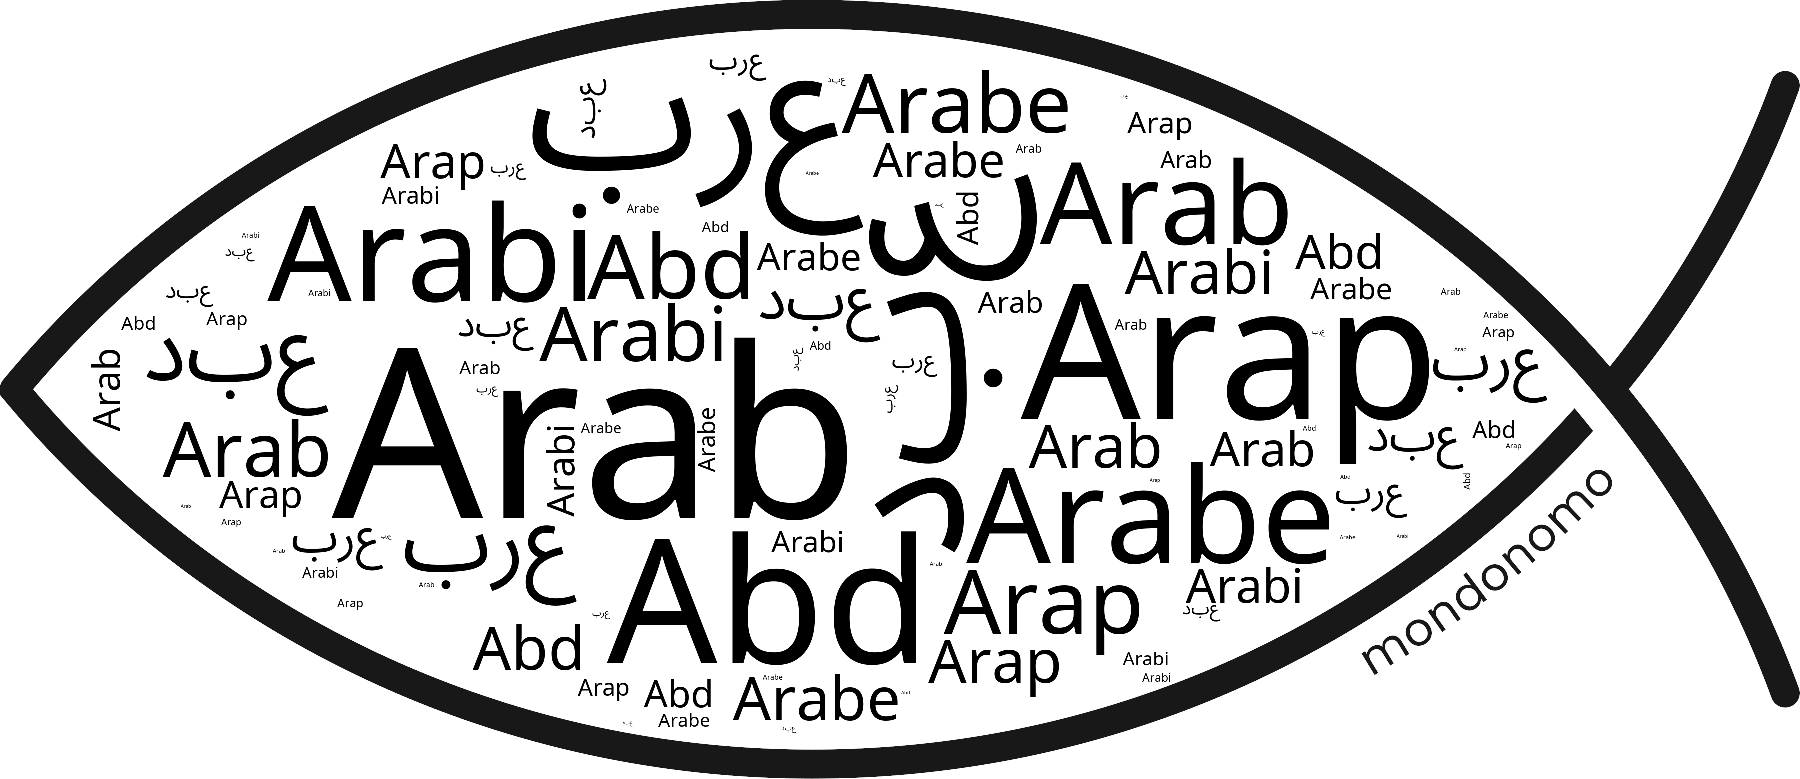 Name Arab in the world's Bibles